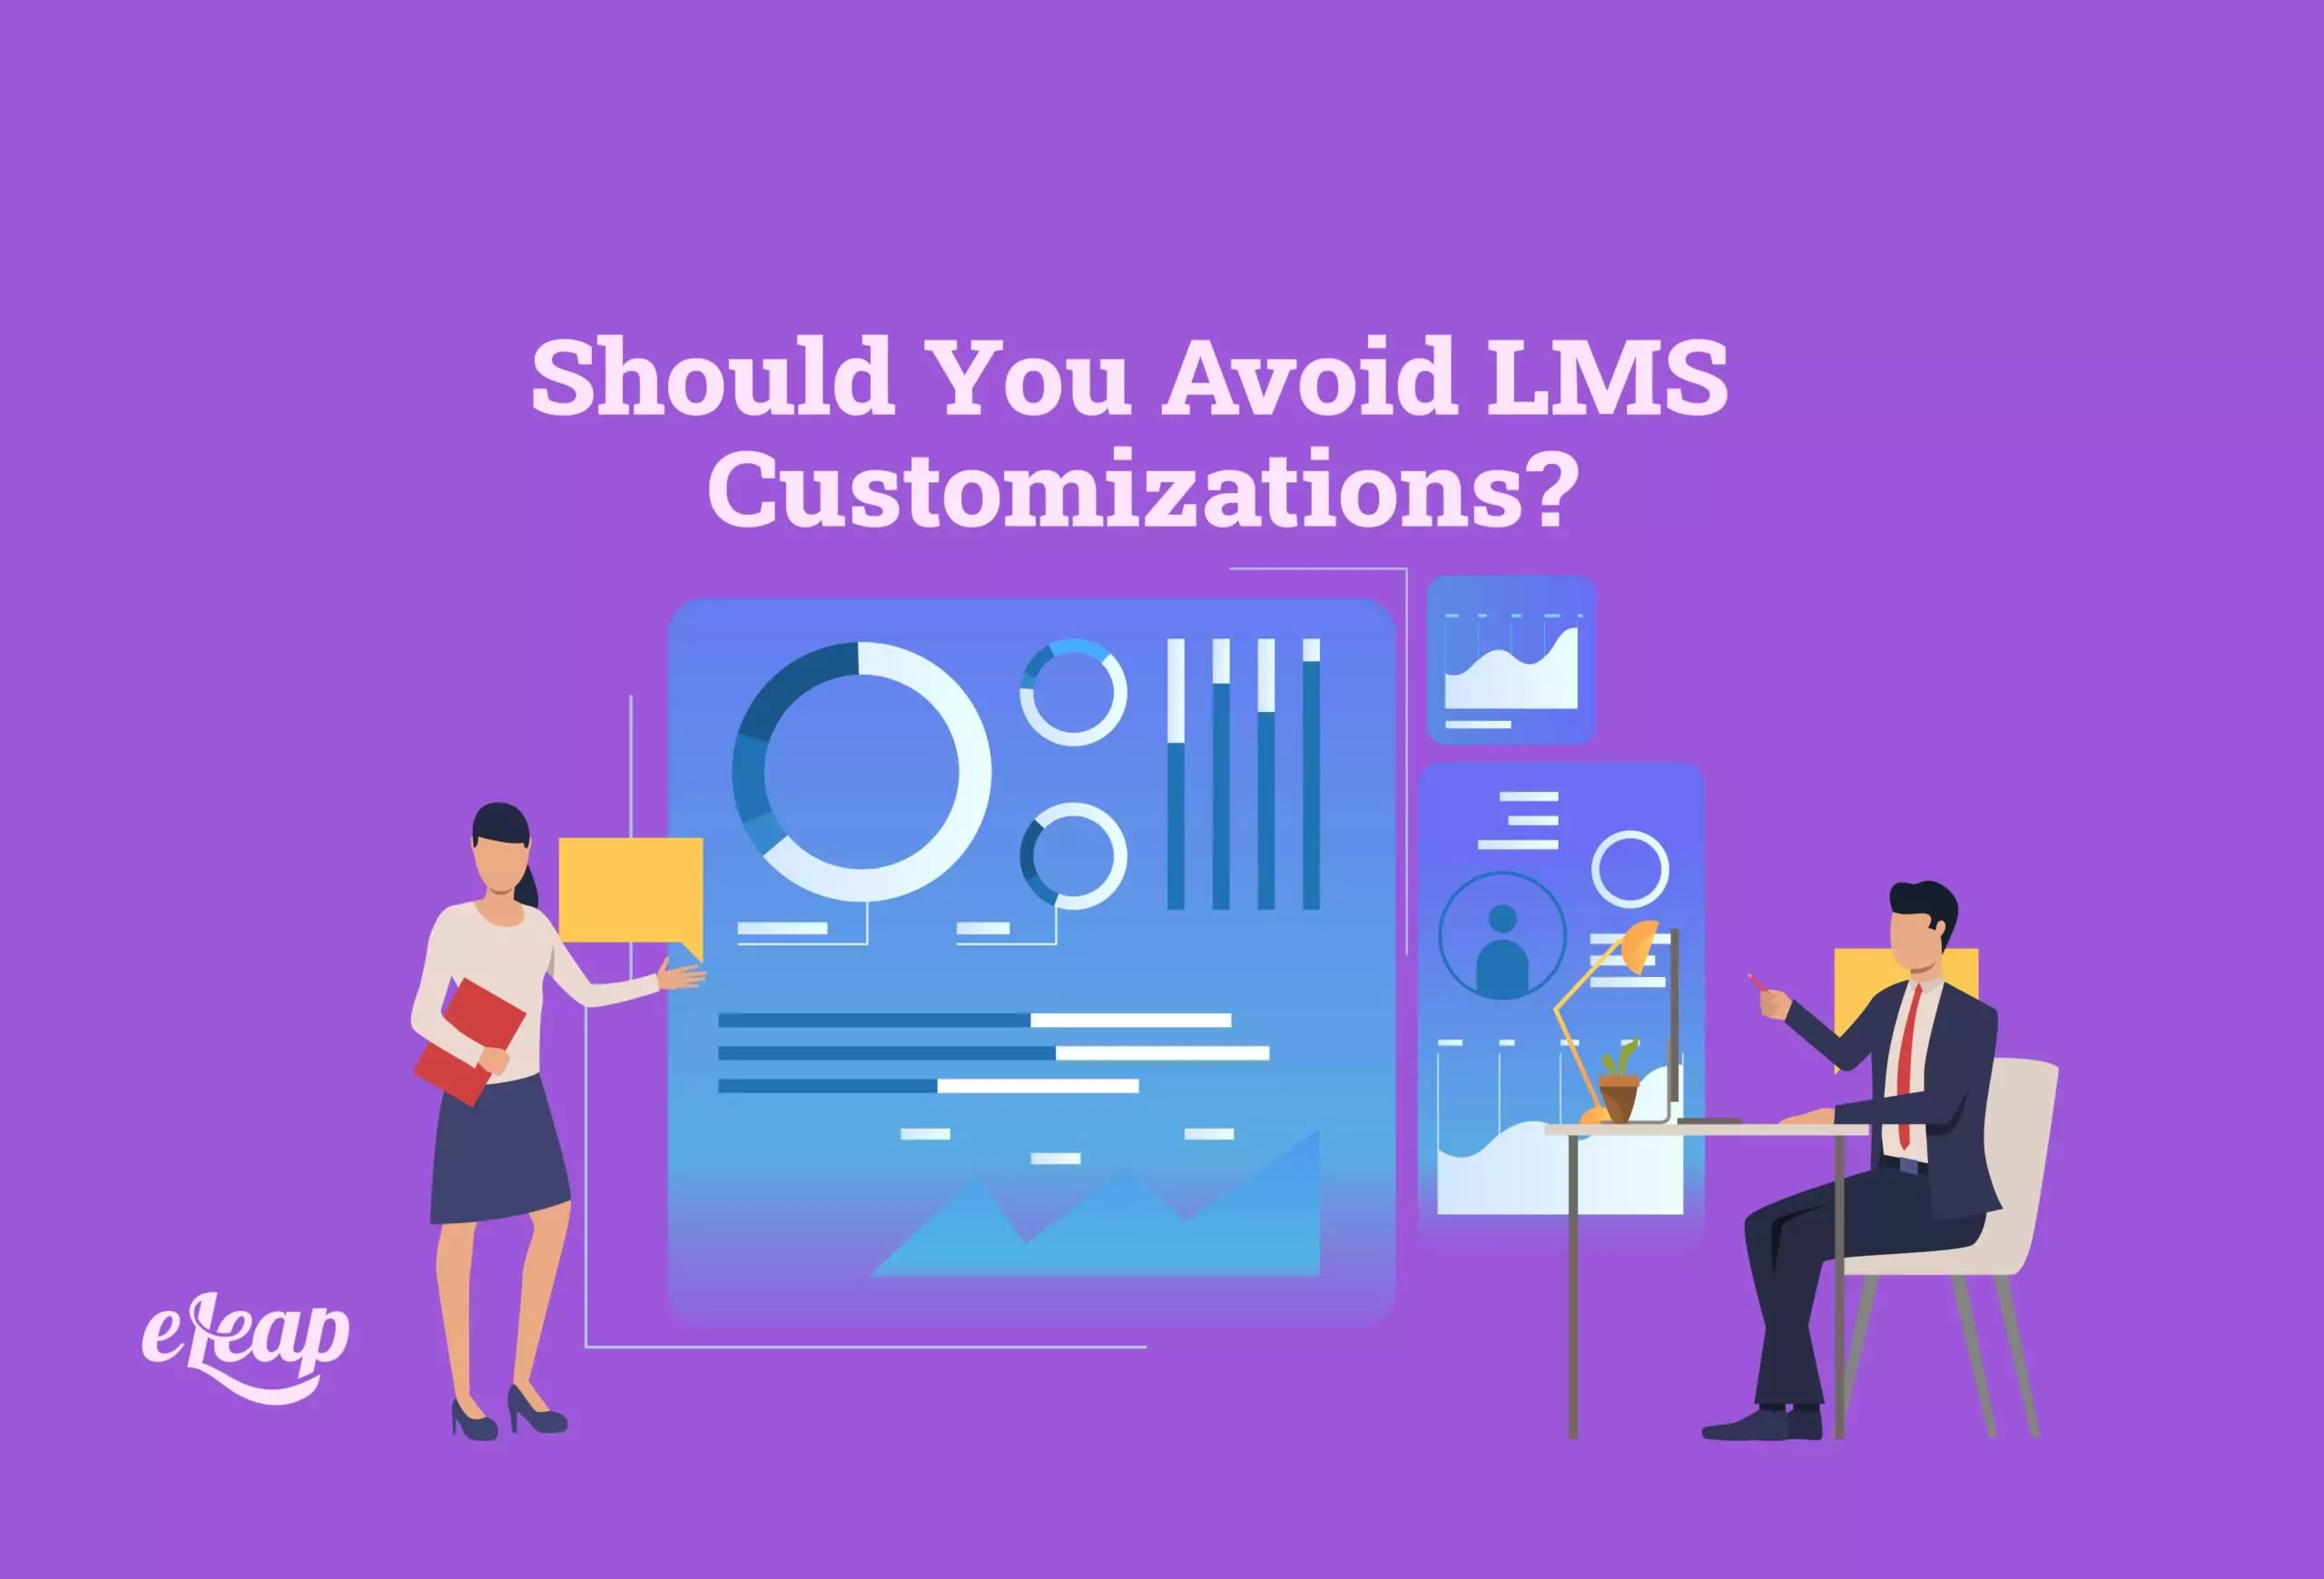 Should You Avoid LMS Customizations?